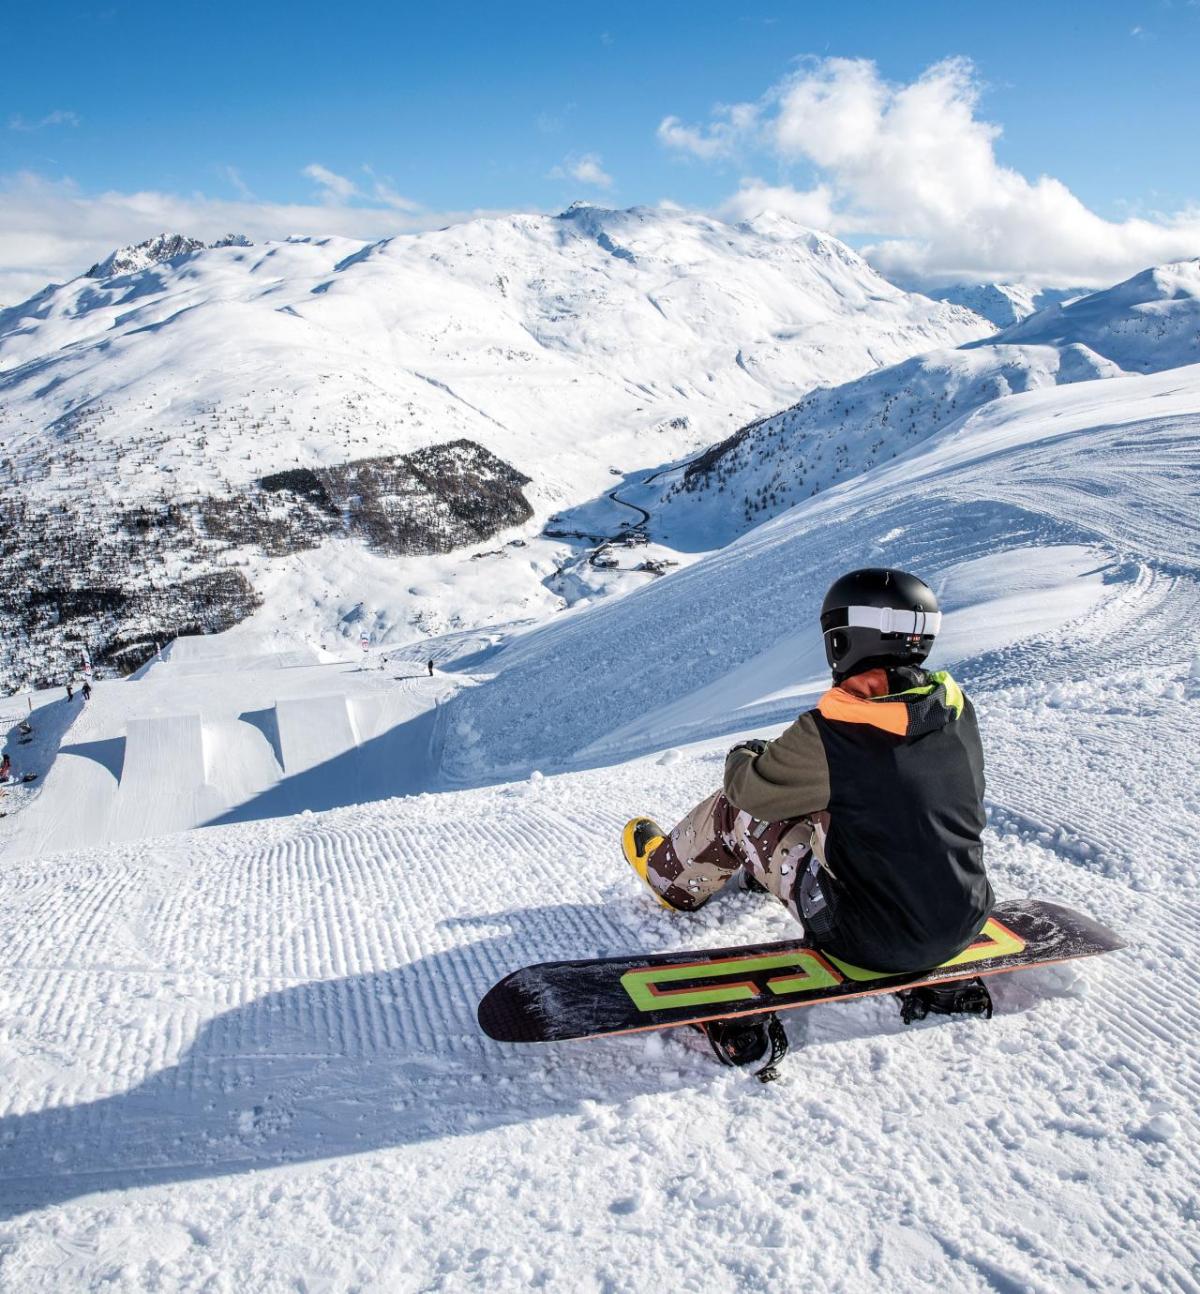 A person sat on a ski board at the top of a snowy mountain